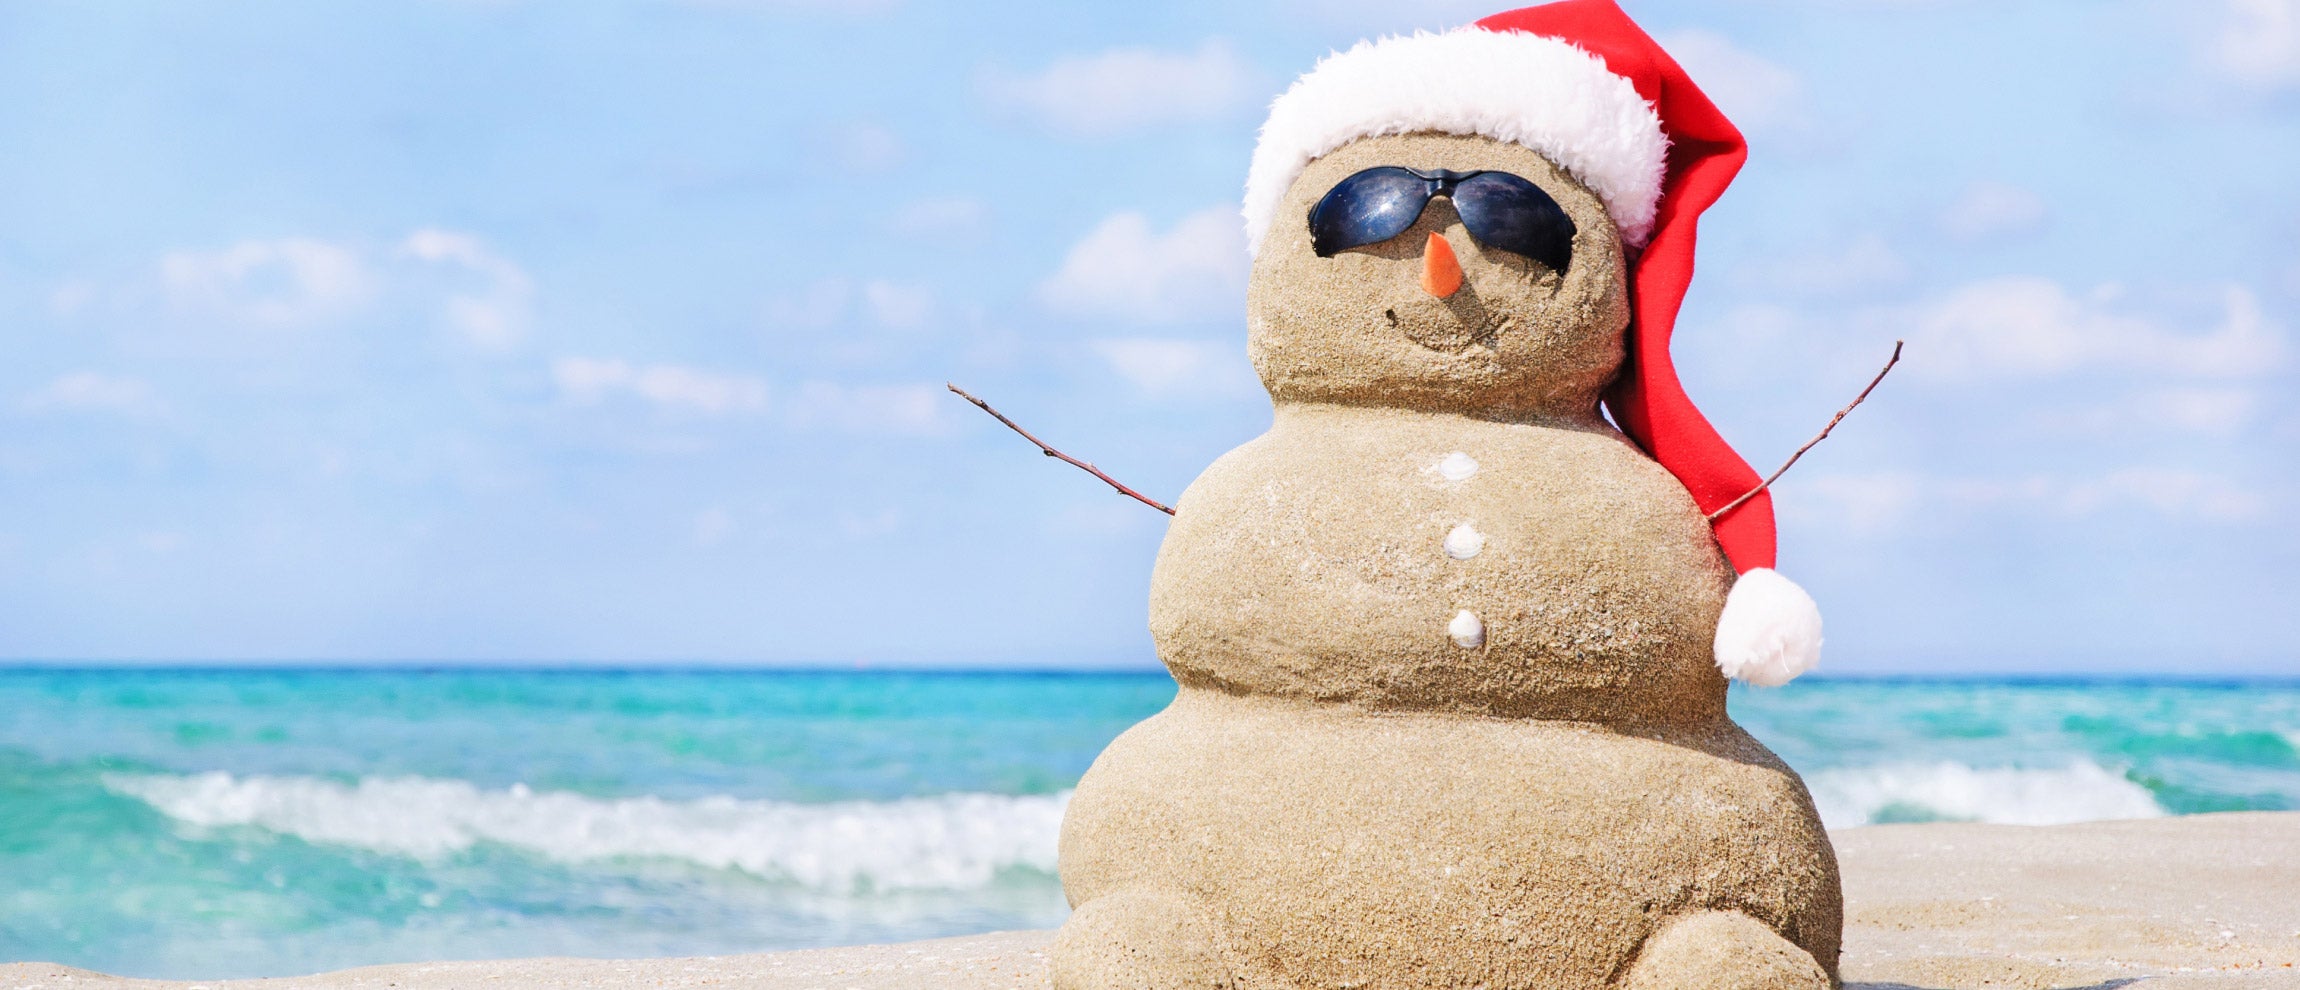 Christmas in July - Embracing the Joy of Christmas in July